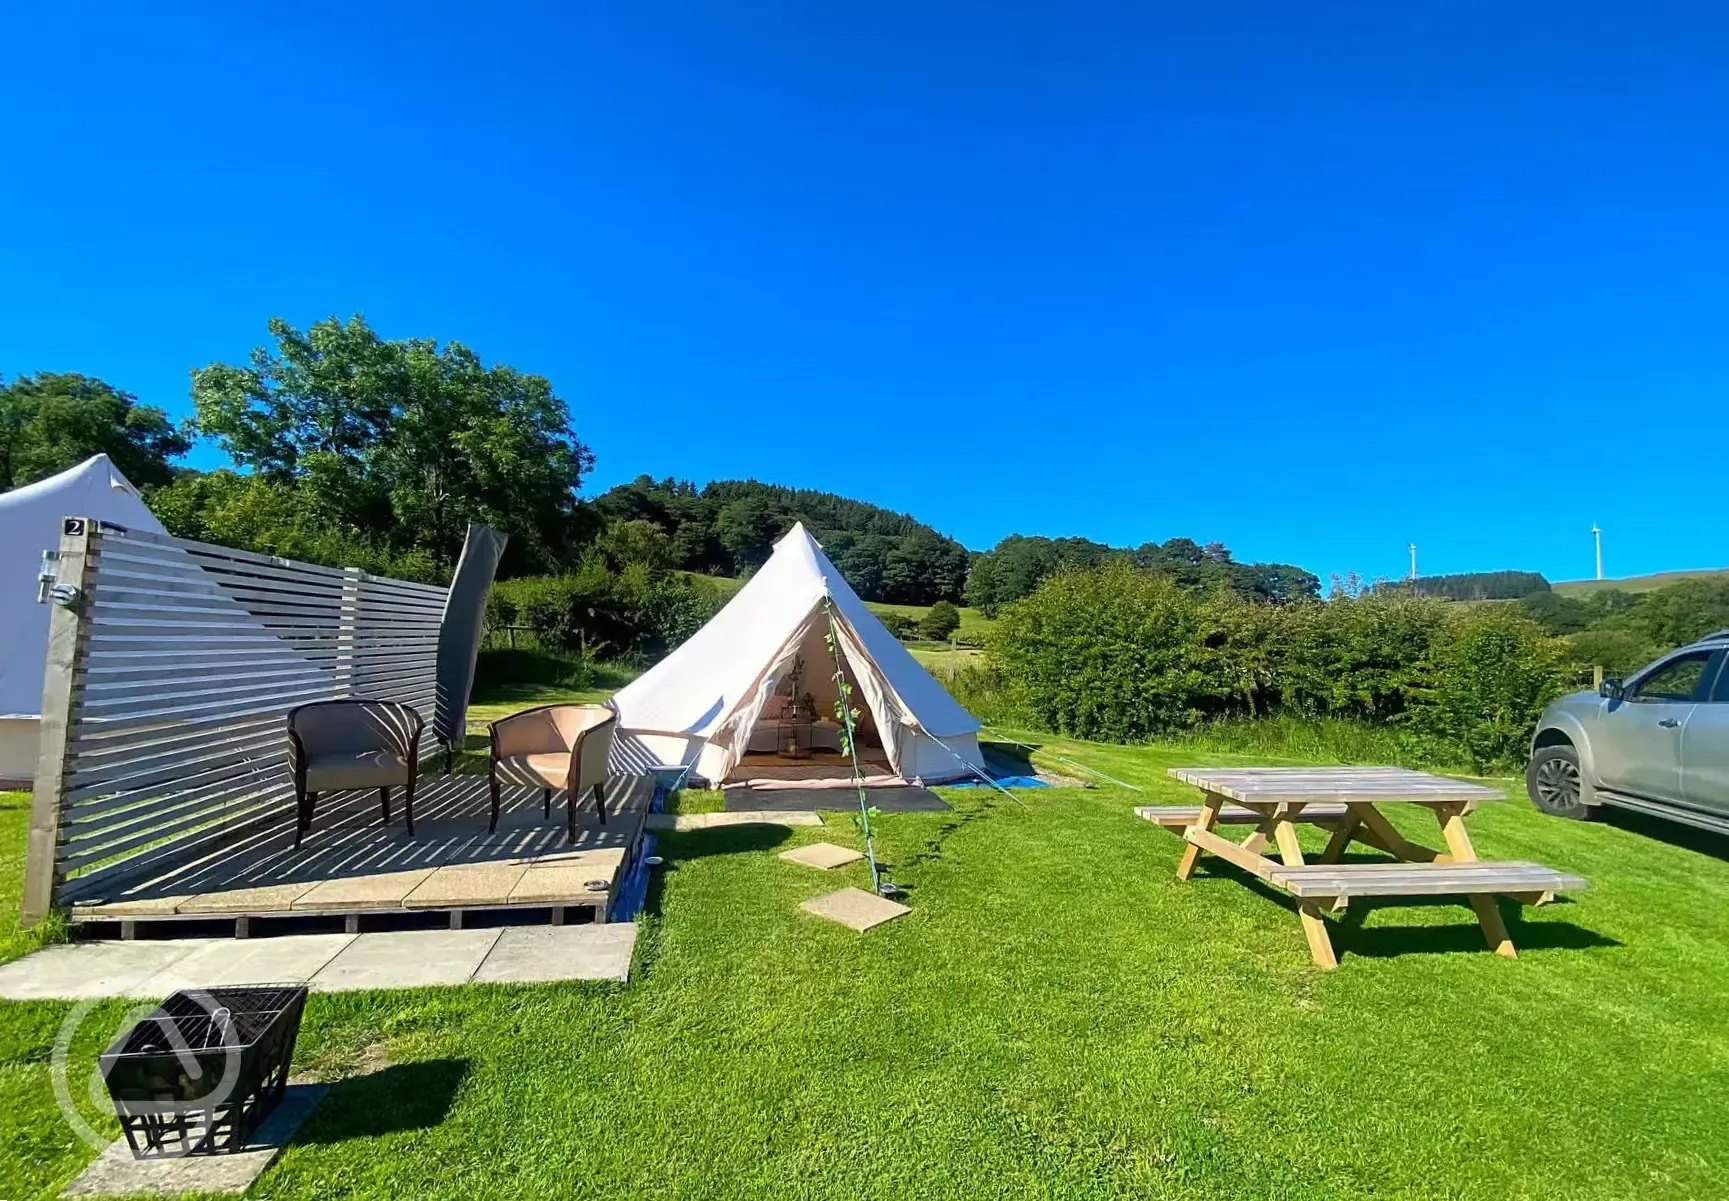 Bell tent in setting